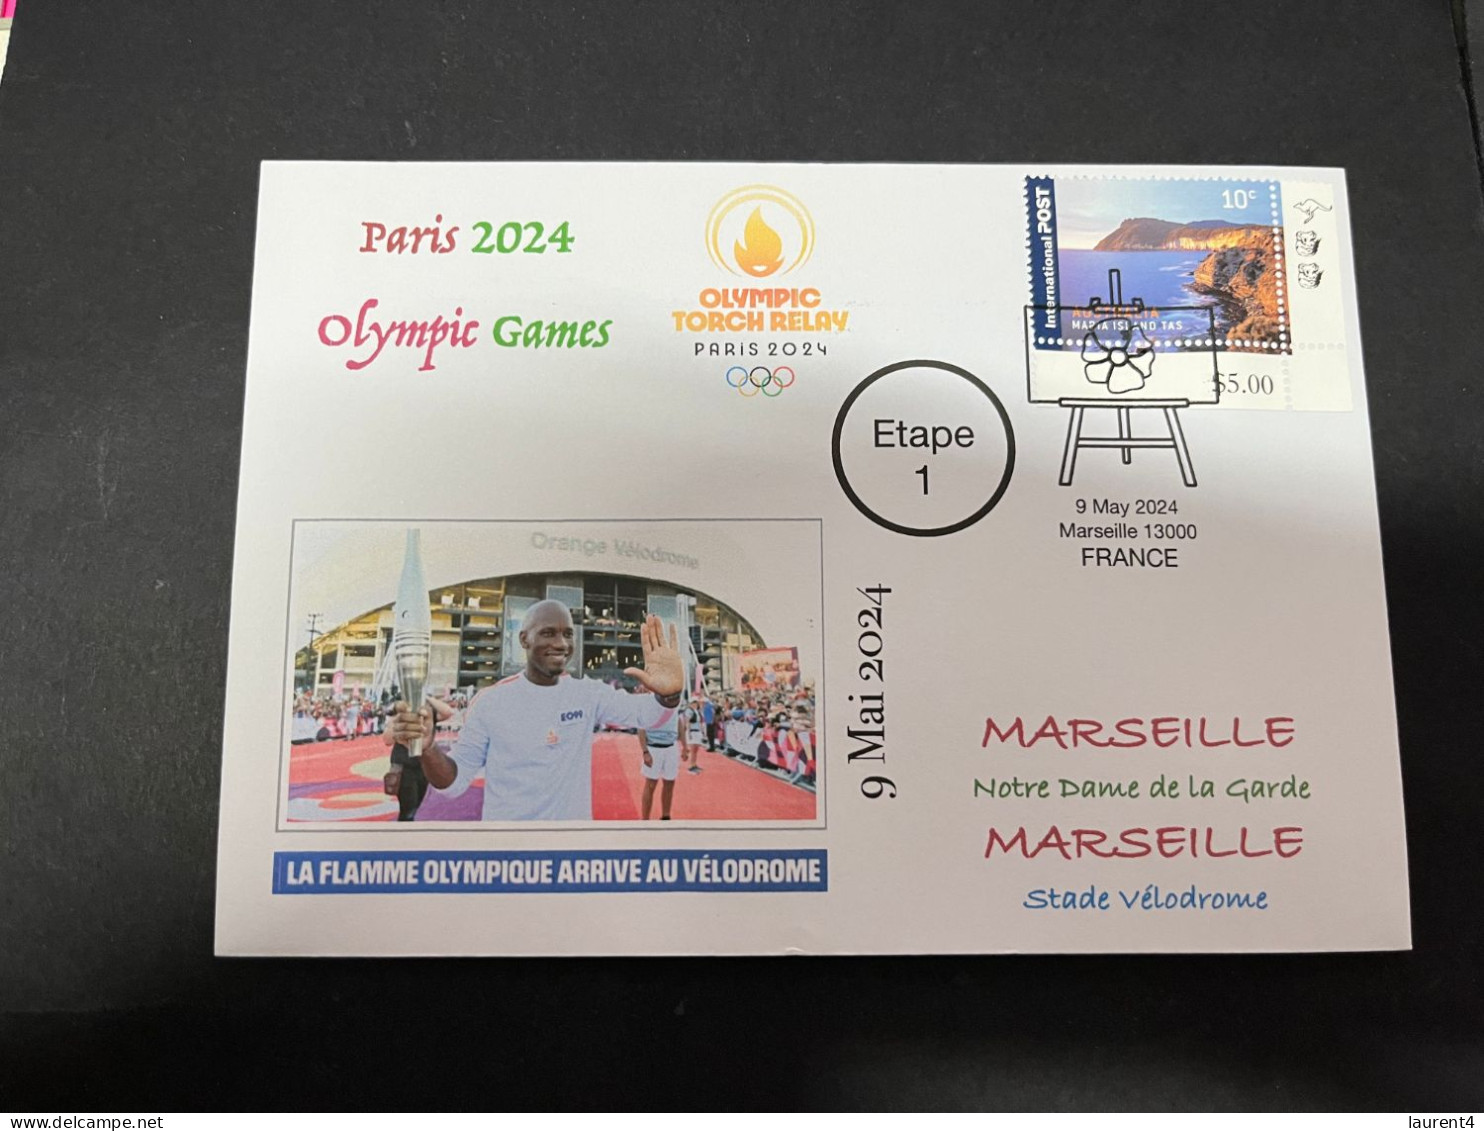 10-5-2024 (4 Z 37) Paris Olympic Games 2024 - Torch Relay (Etape 1) In Marseille (9-5-2024) With OZ Stamp - Verano 2024 : París